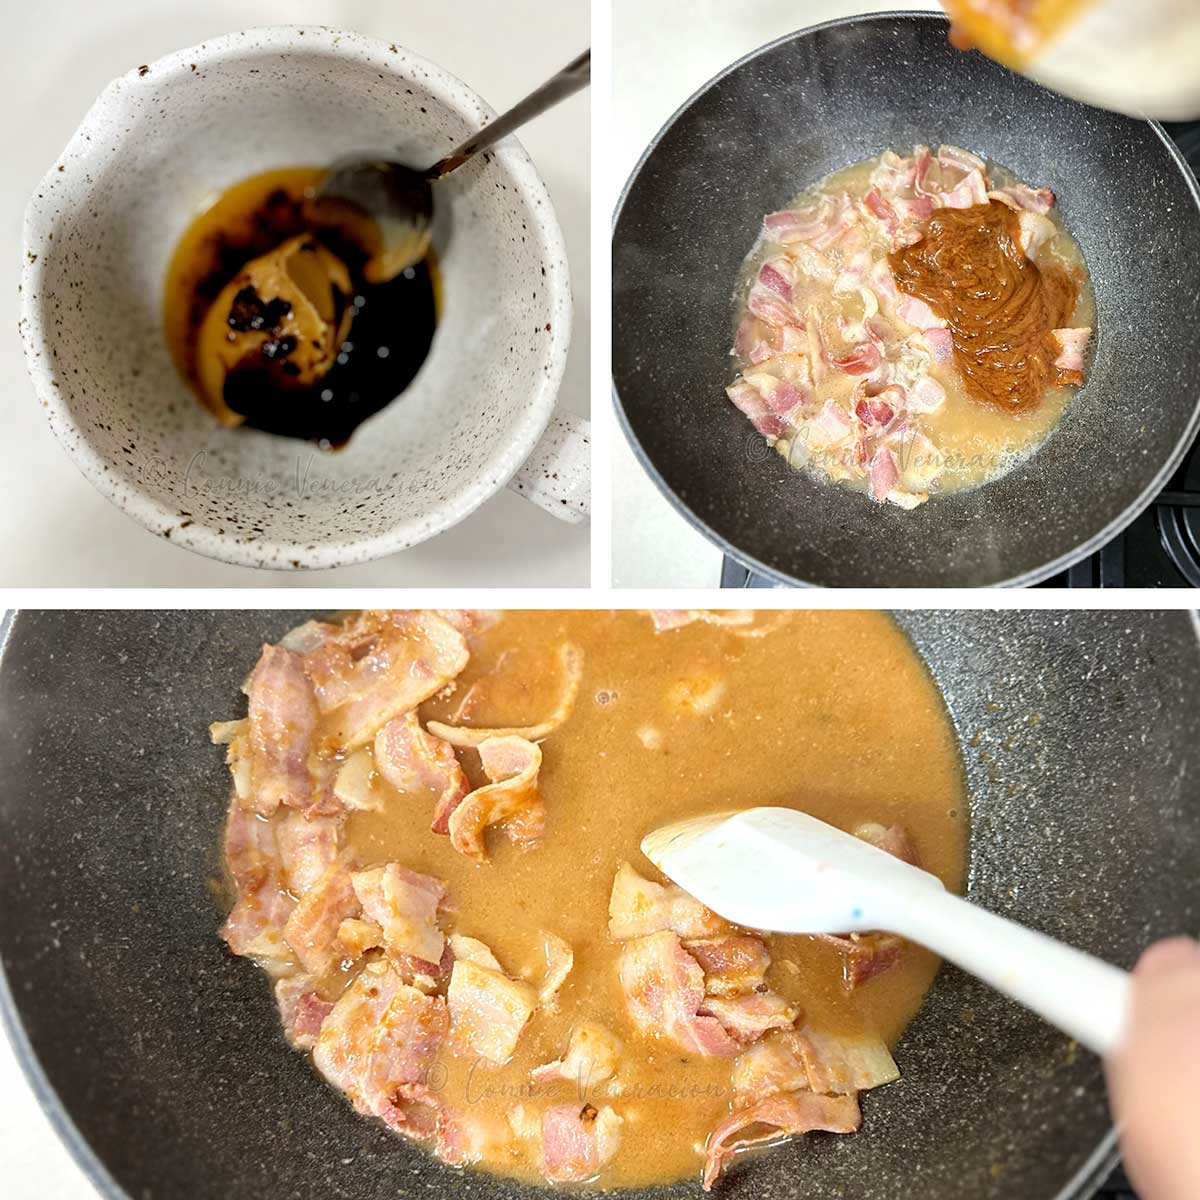 Making sauce with peanut butter, sweet soy sauce, oyster sauce and chili oil